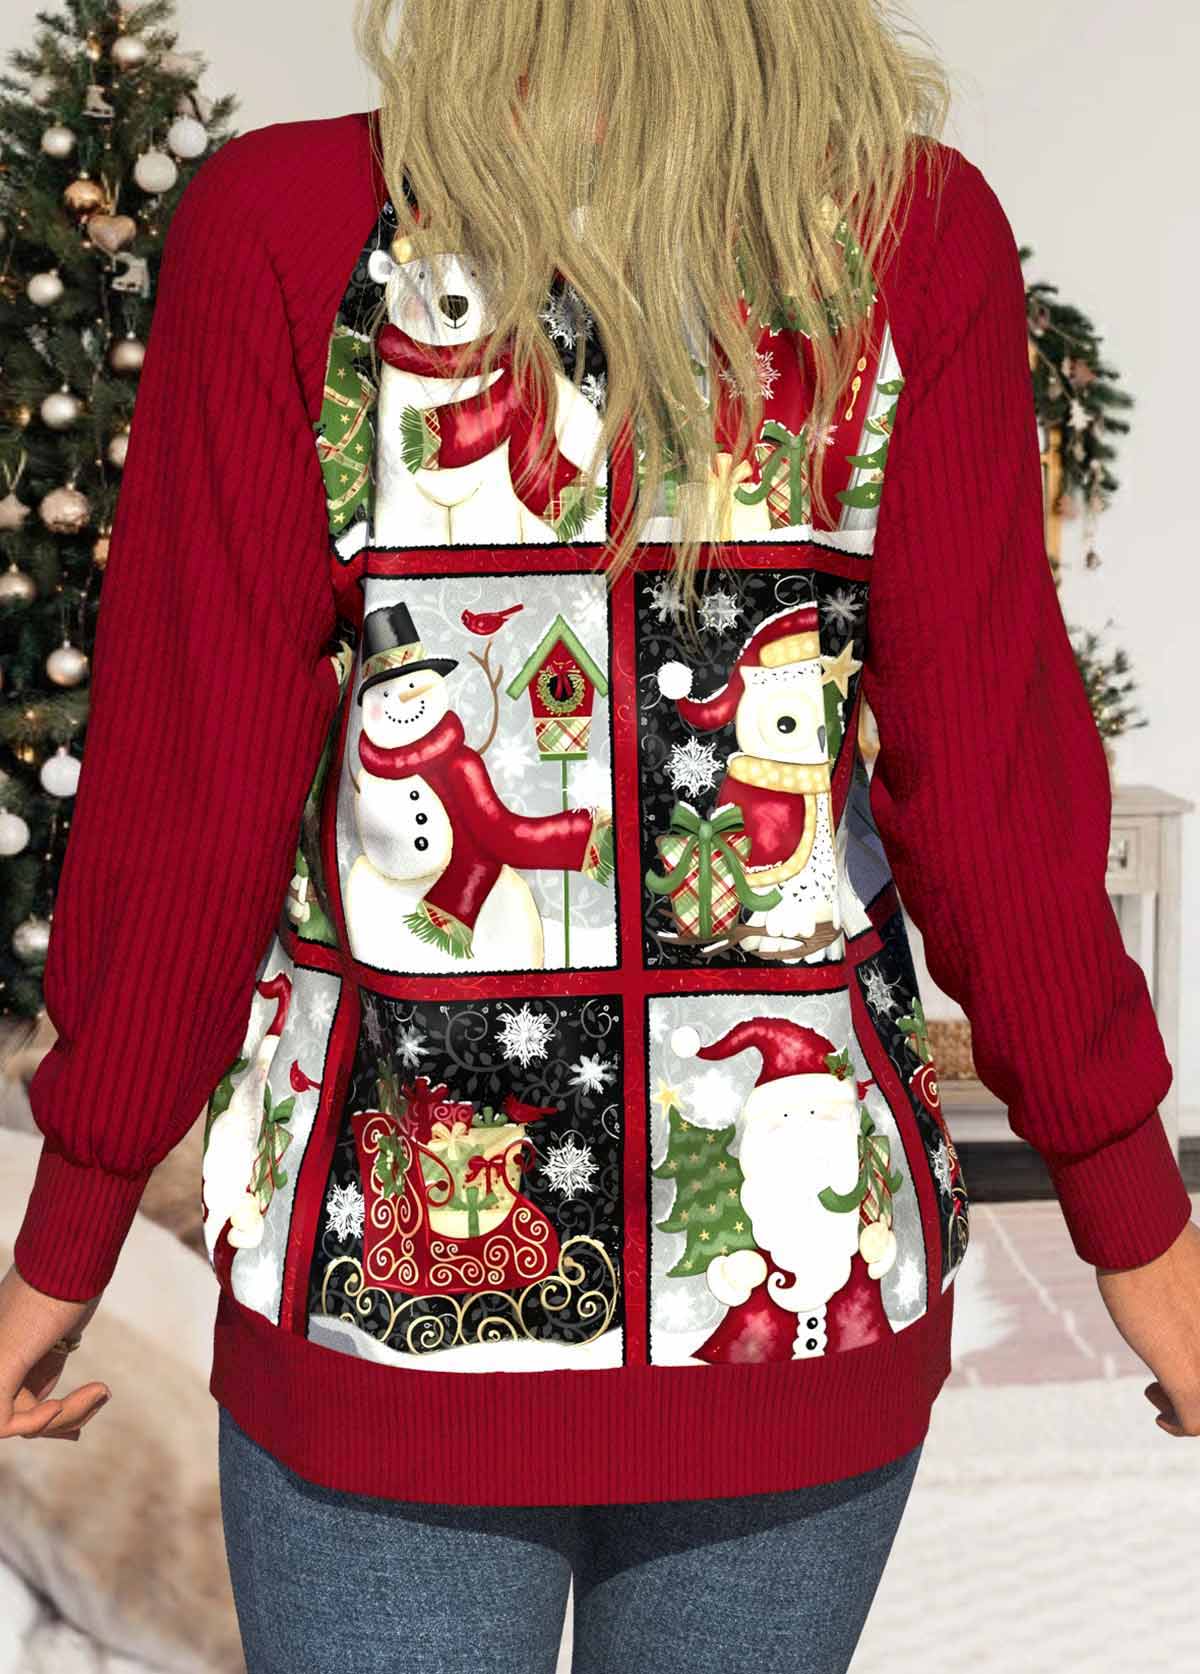 Wine Red Patchwork Christmas Print Long Sleeve Coat